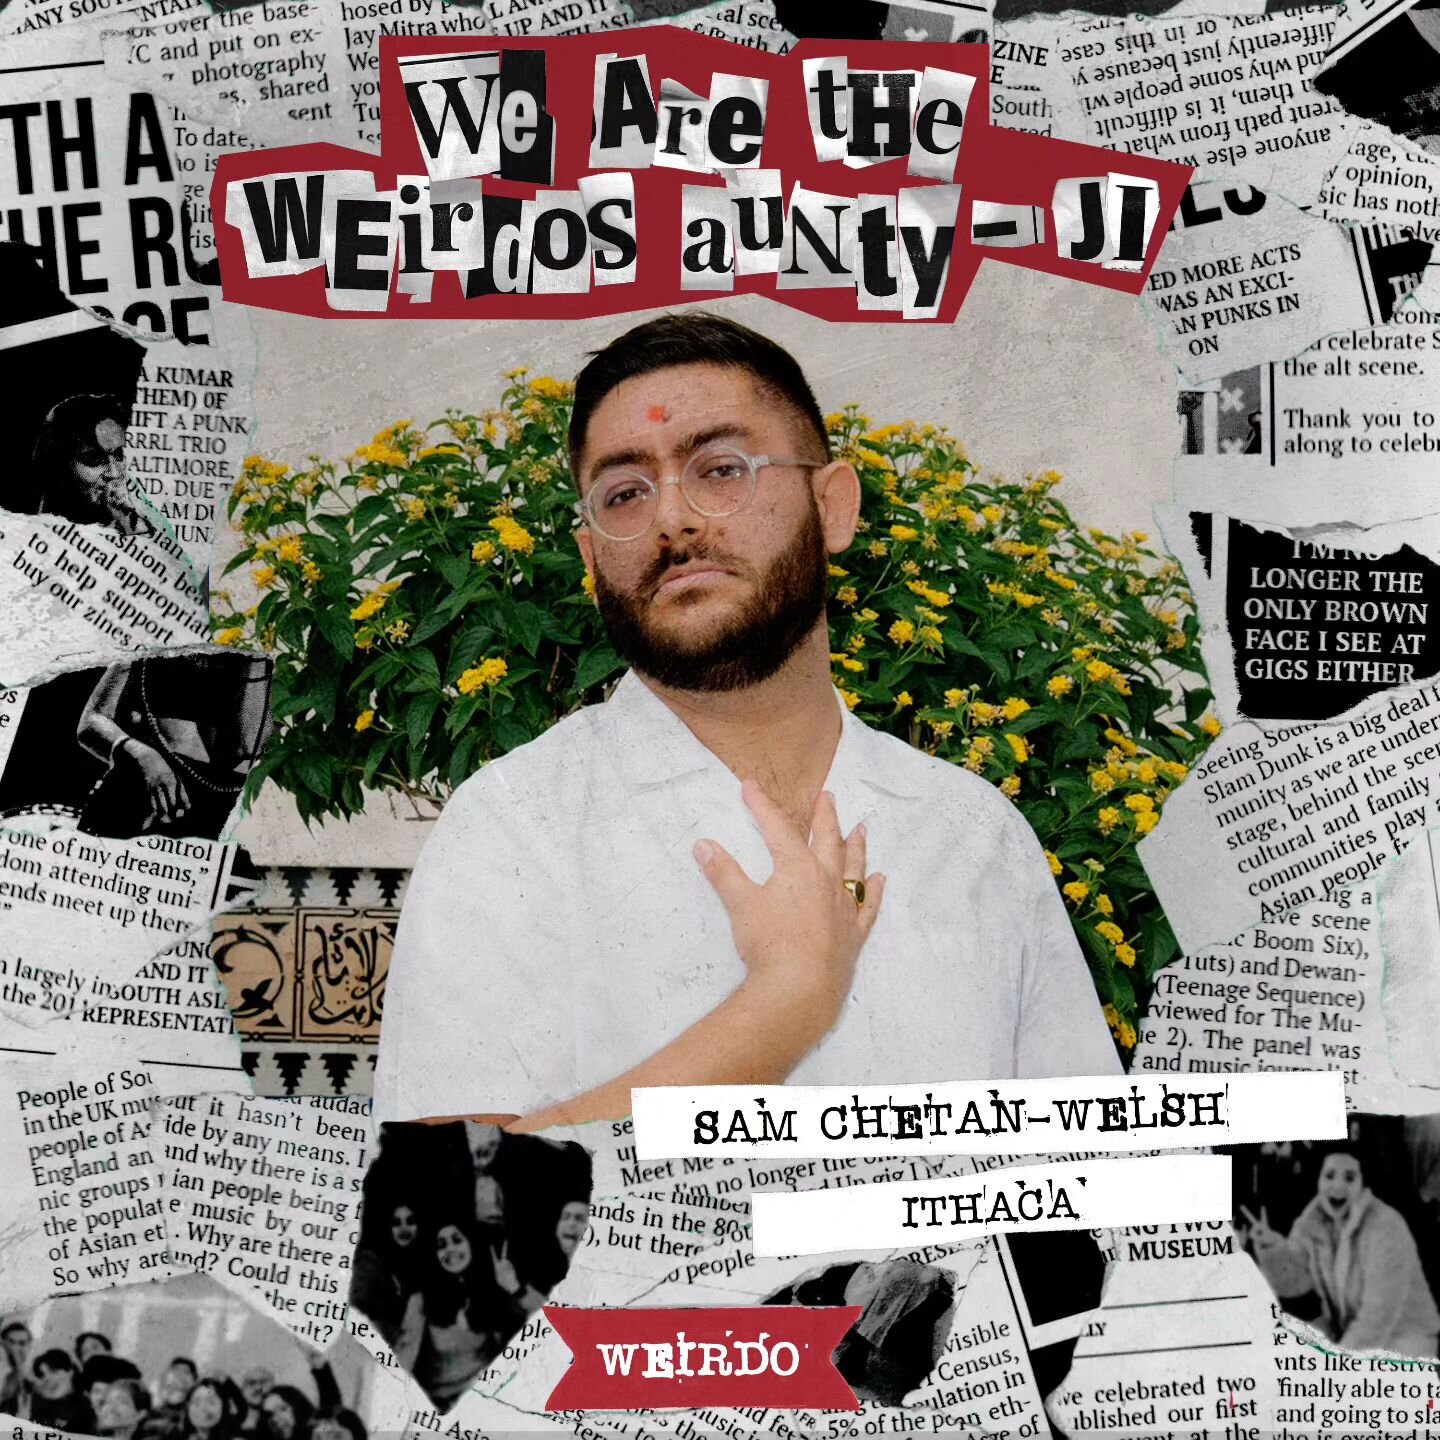 Episode 6 of We Are The Weirdos, Aunty-ji is out now! Sam Chetan-Welsh @schetanw guitarist in British metalcore band @ithacaband joined us for a chat 🤘🏾

In this episode, Neil Parmar @neilpumpkins86 spoke to Sam about the formation of Ithaca and th